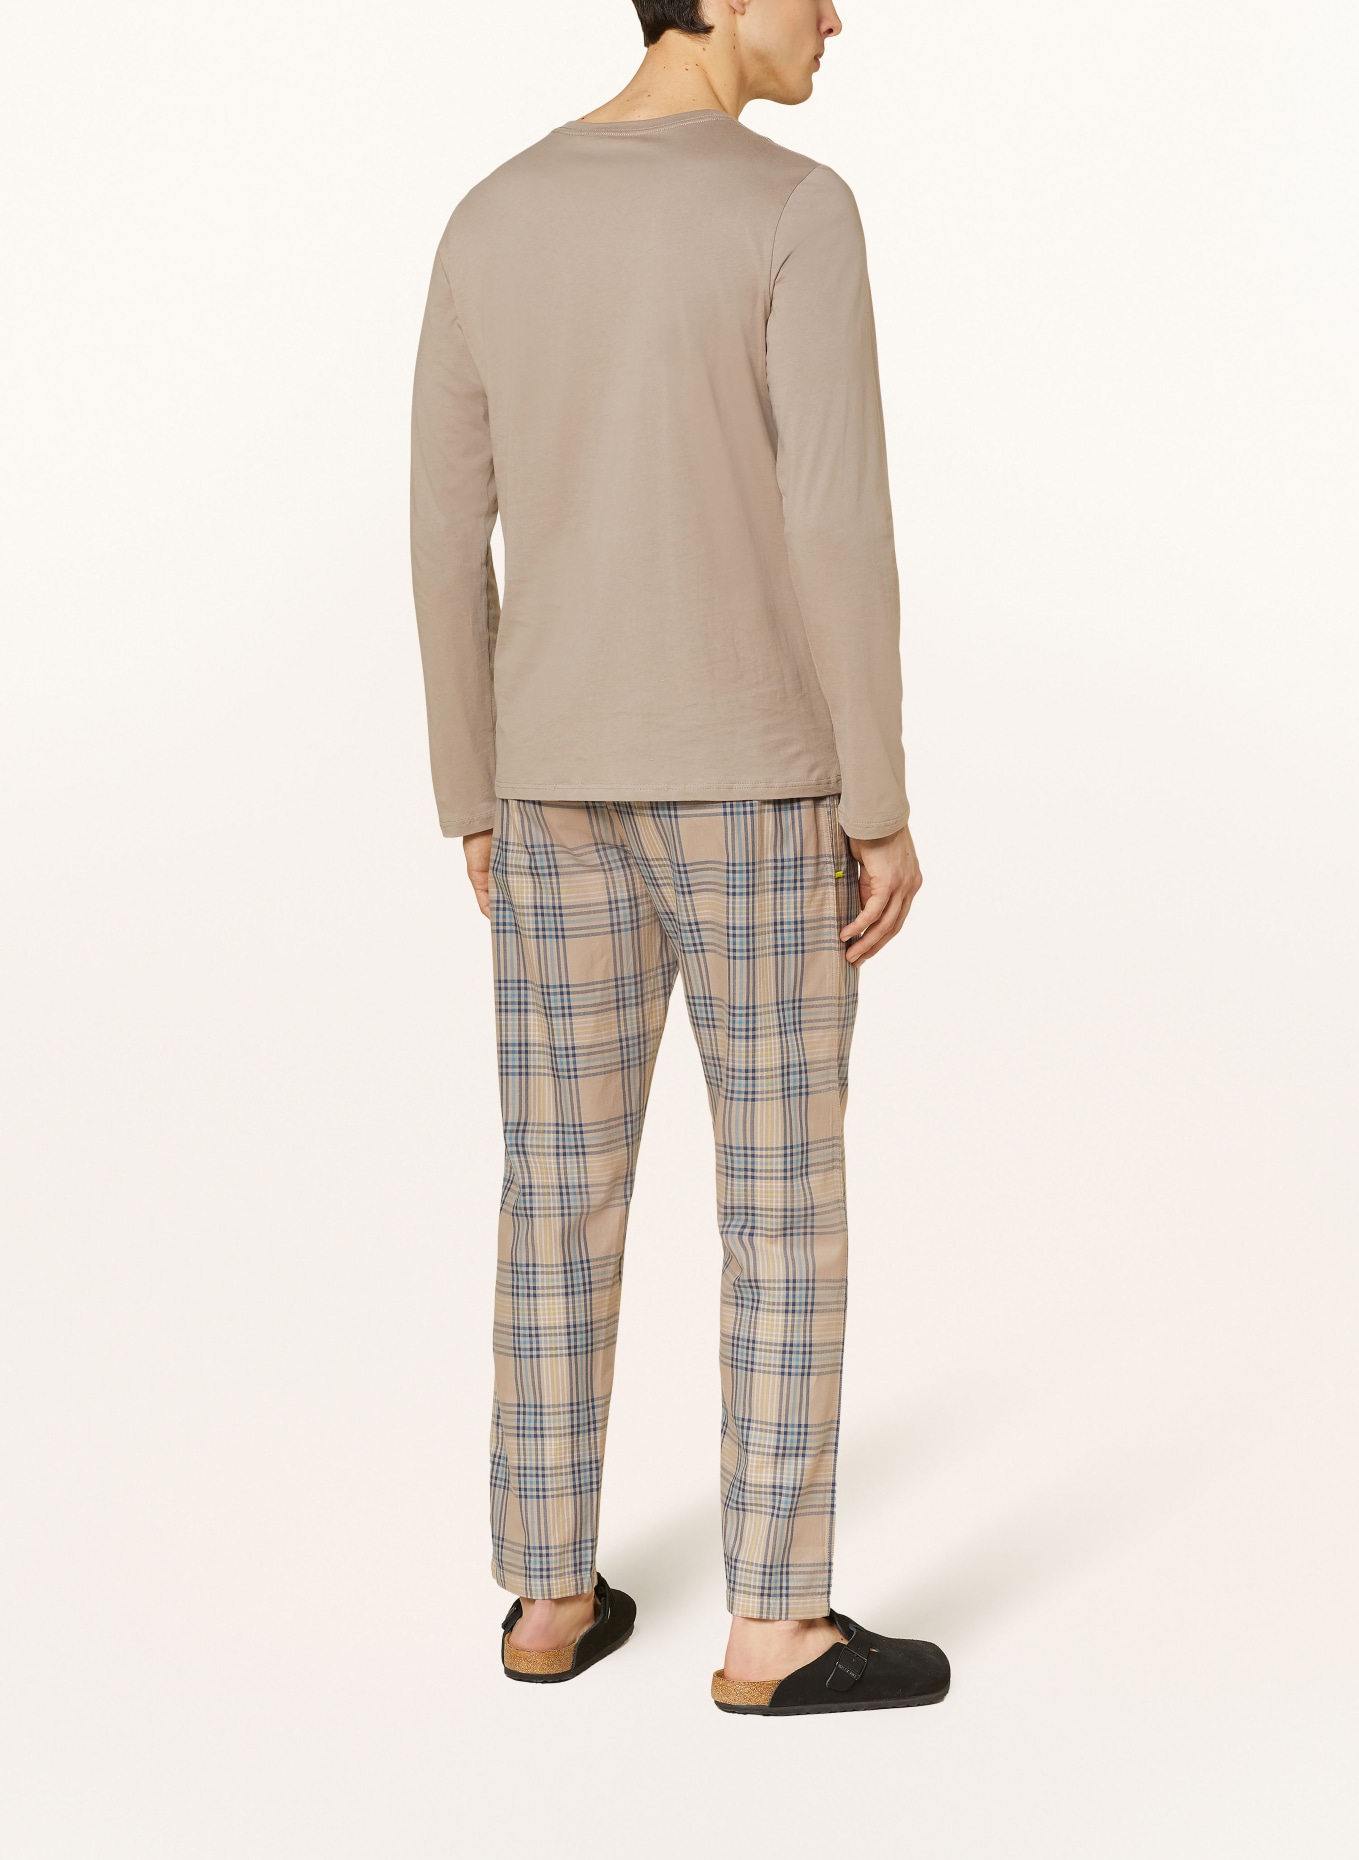 SCHIESSER Pajama shirt MIX + RELAX, Color: TAUPE (Image 3)